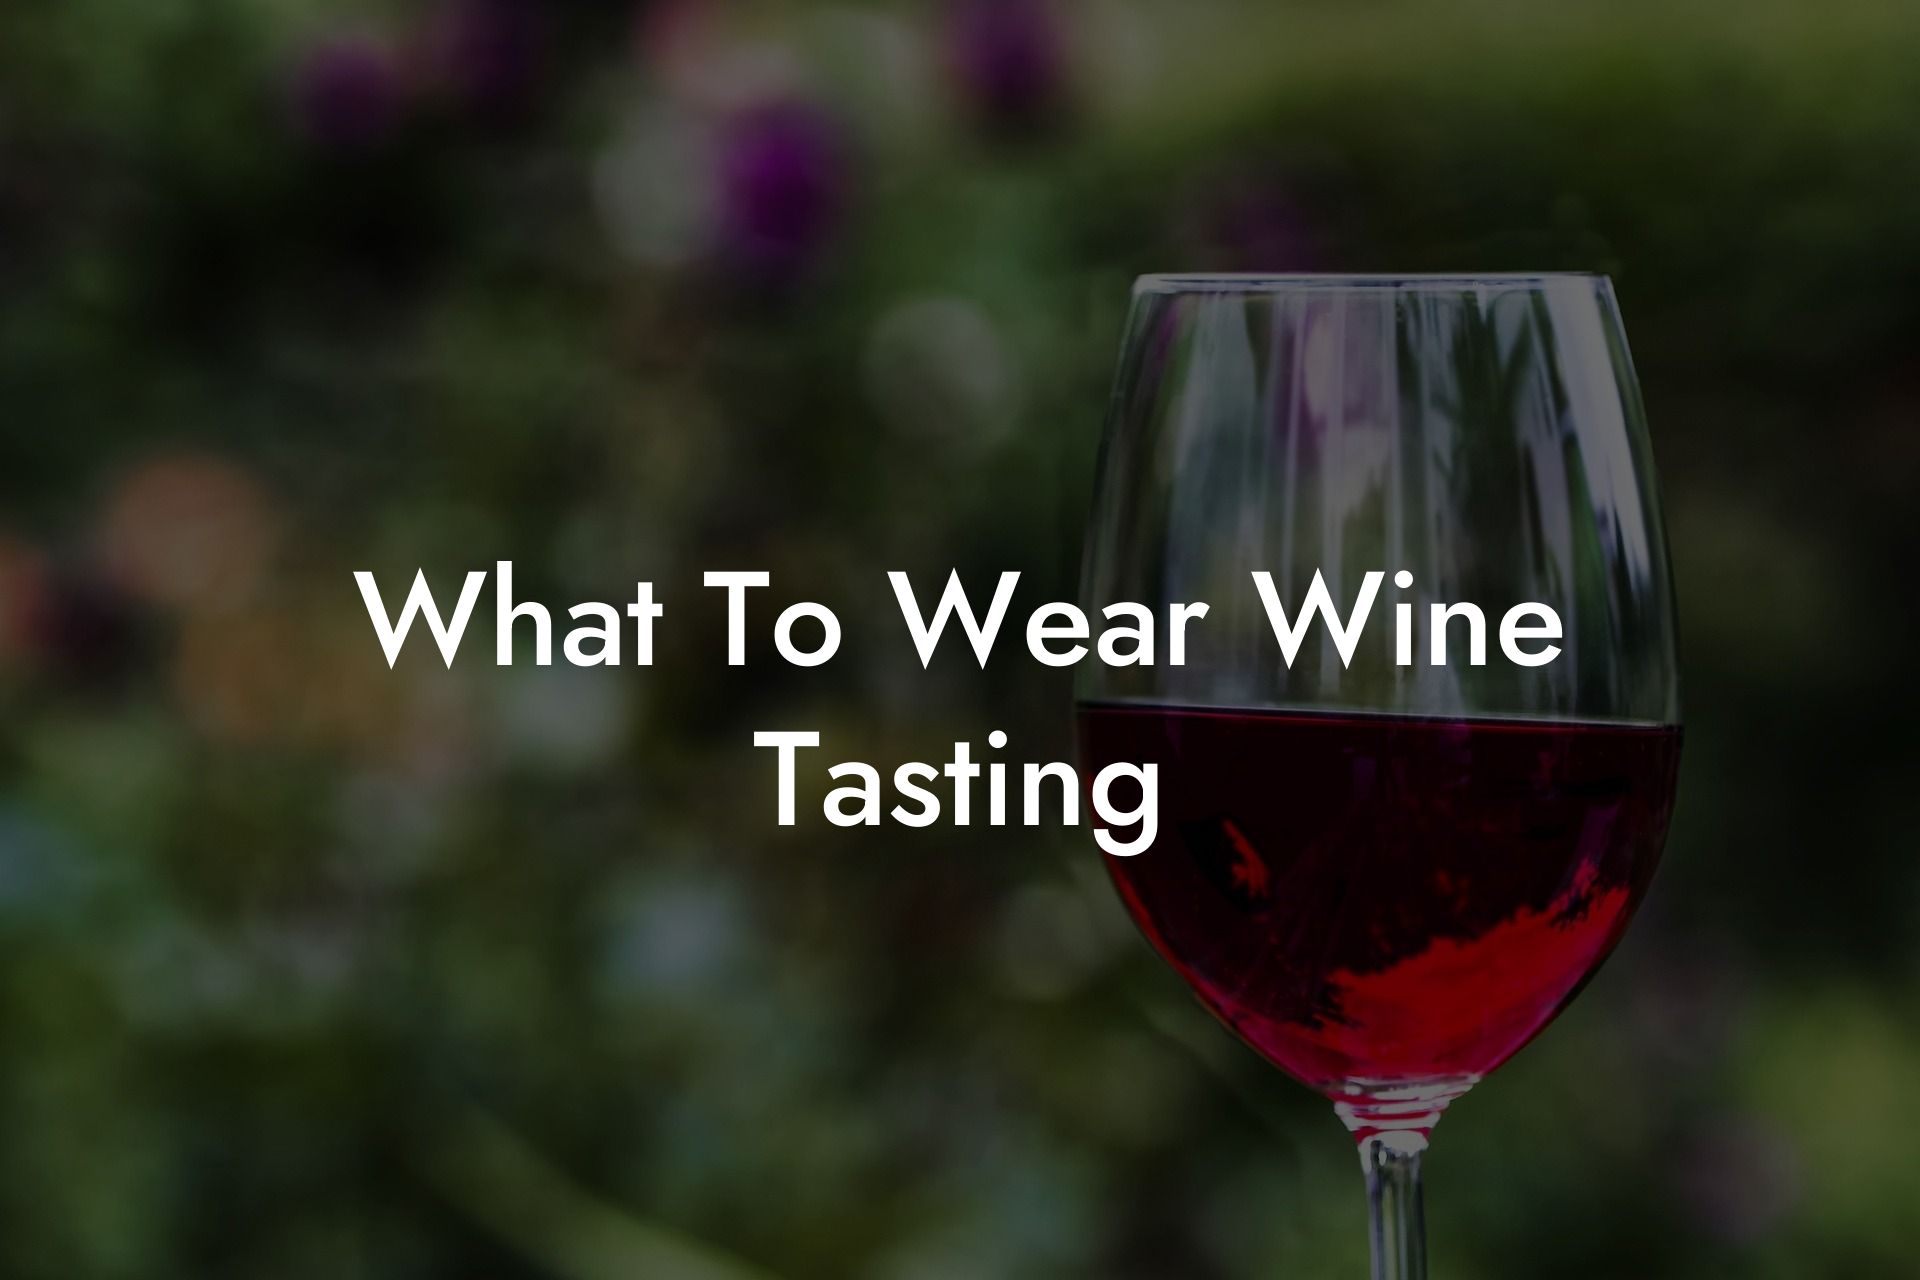 What To Wear Wine Tasting